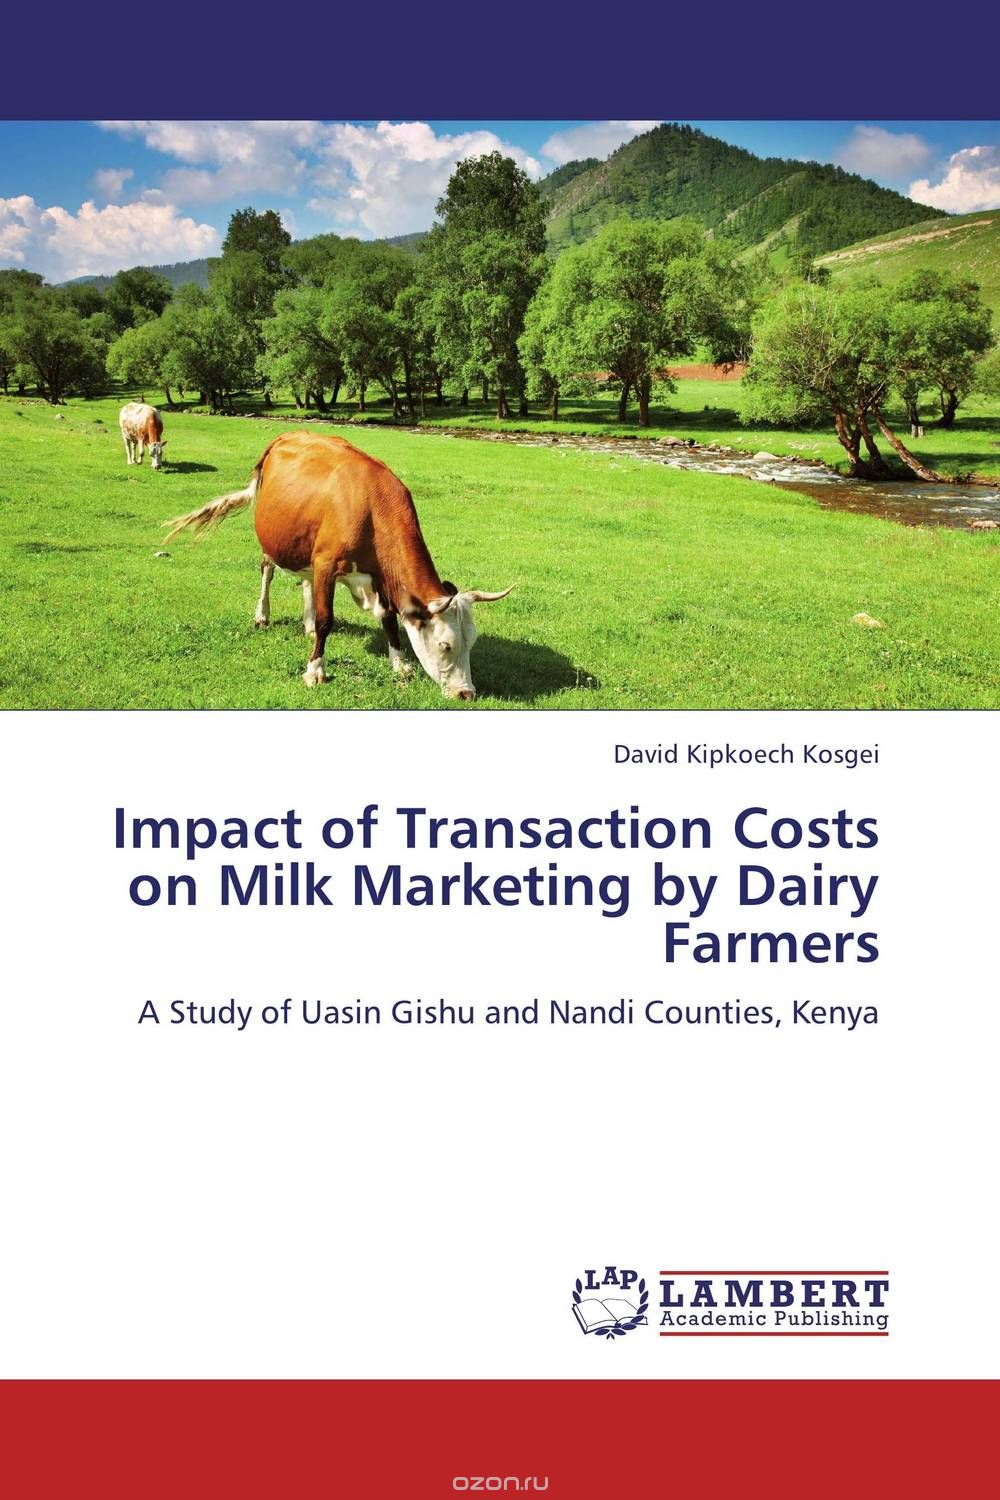 Impact of Transaction Costs on Milk Marketing by Dairy Farmers